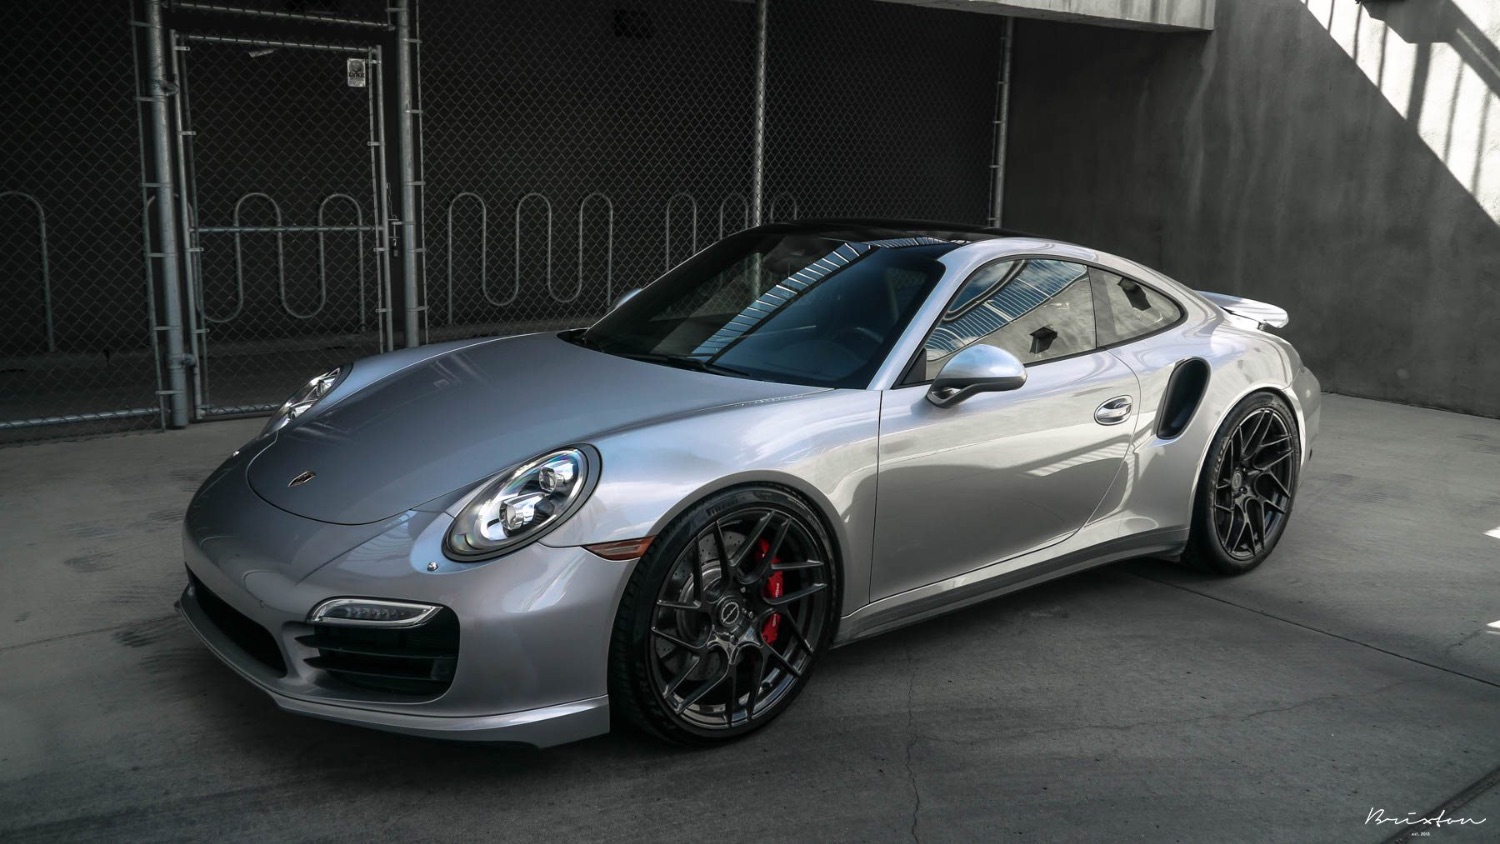 brixton-forged-silver-porsche-991-turbo-s-brixton-forged-cm7-ultrasport-1-piece-concave-forged-wheels-brushed-smoke-black-3-1800x1013